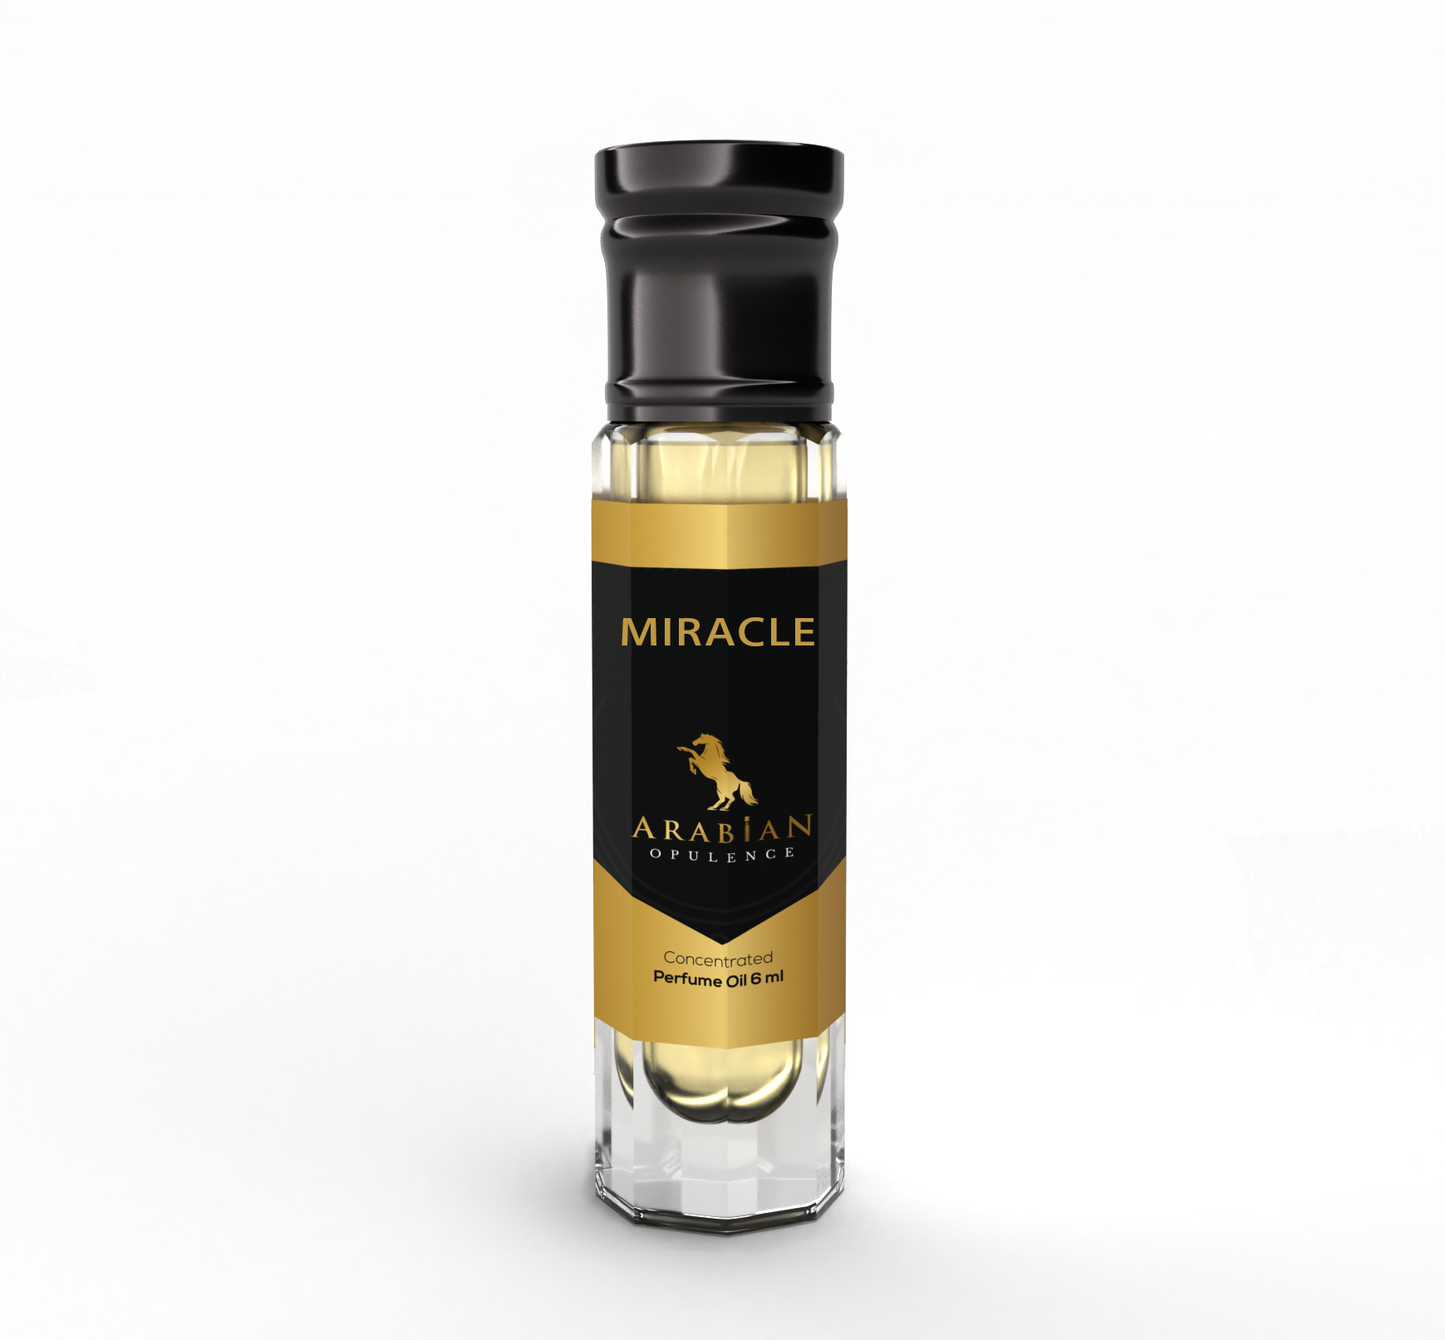 FR204  MIRACLE perfume oil for women  - Perfume Body Oil - Alcohol Free